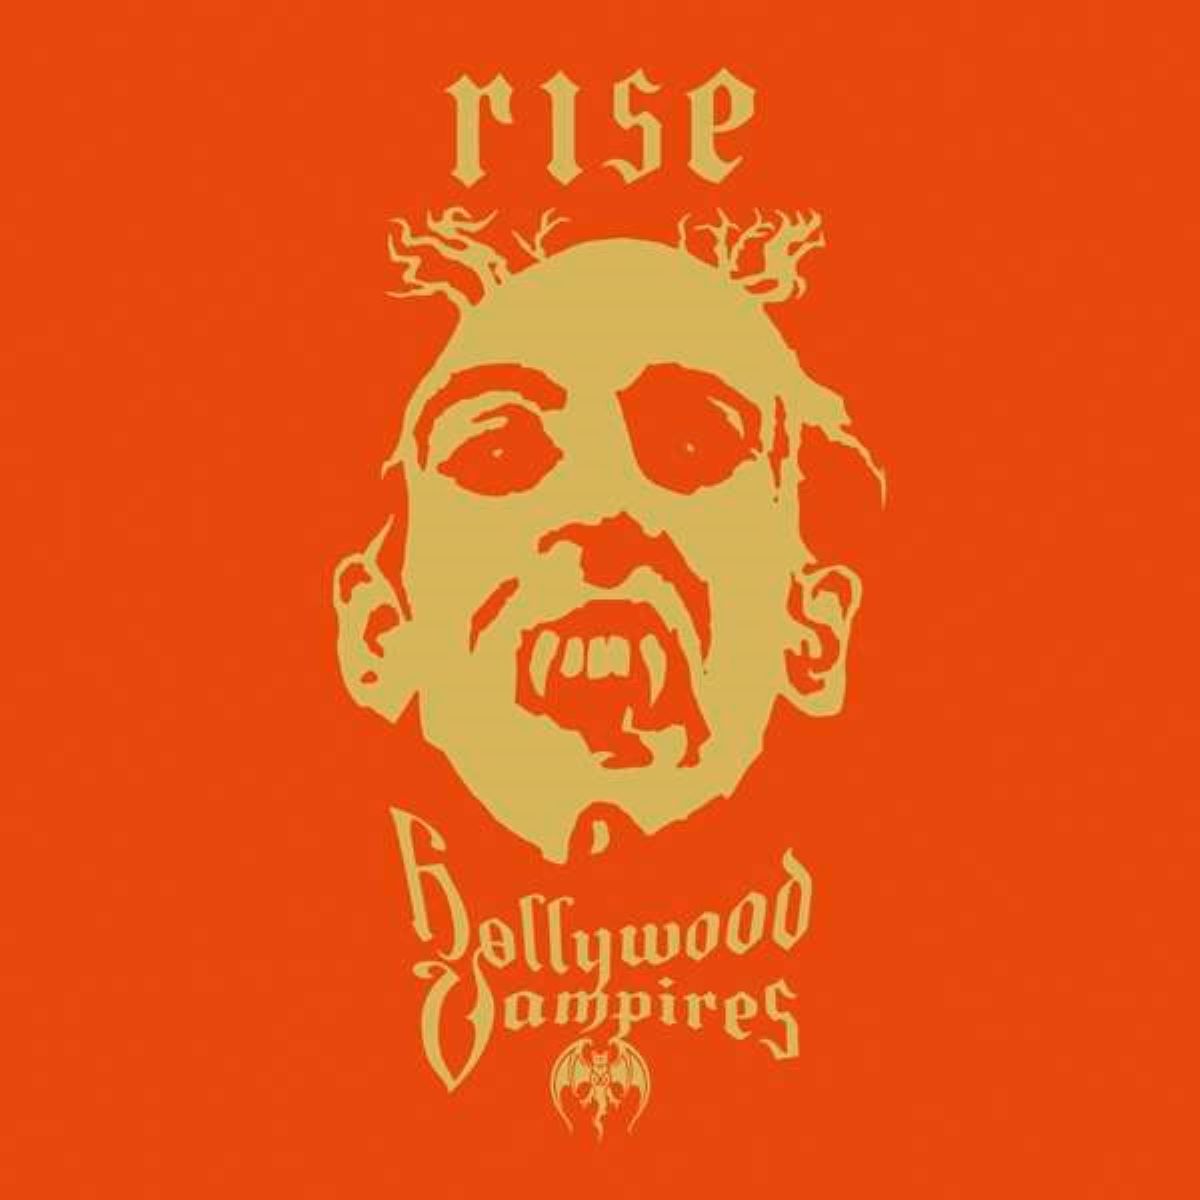 Hollywood Vampires Rise CD multicolor